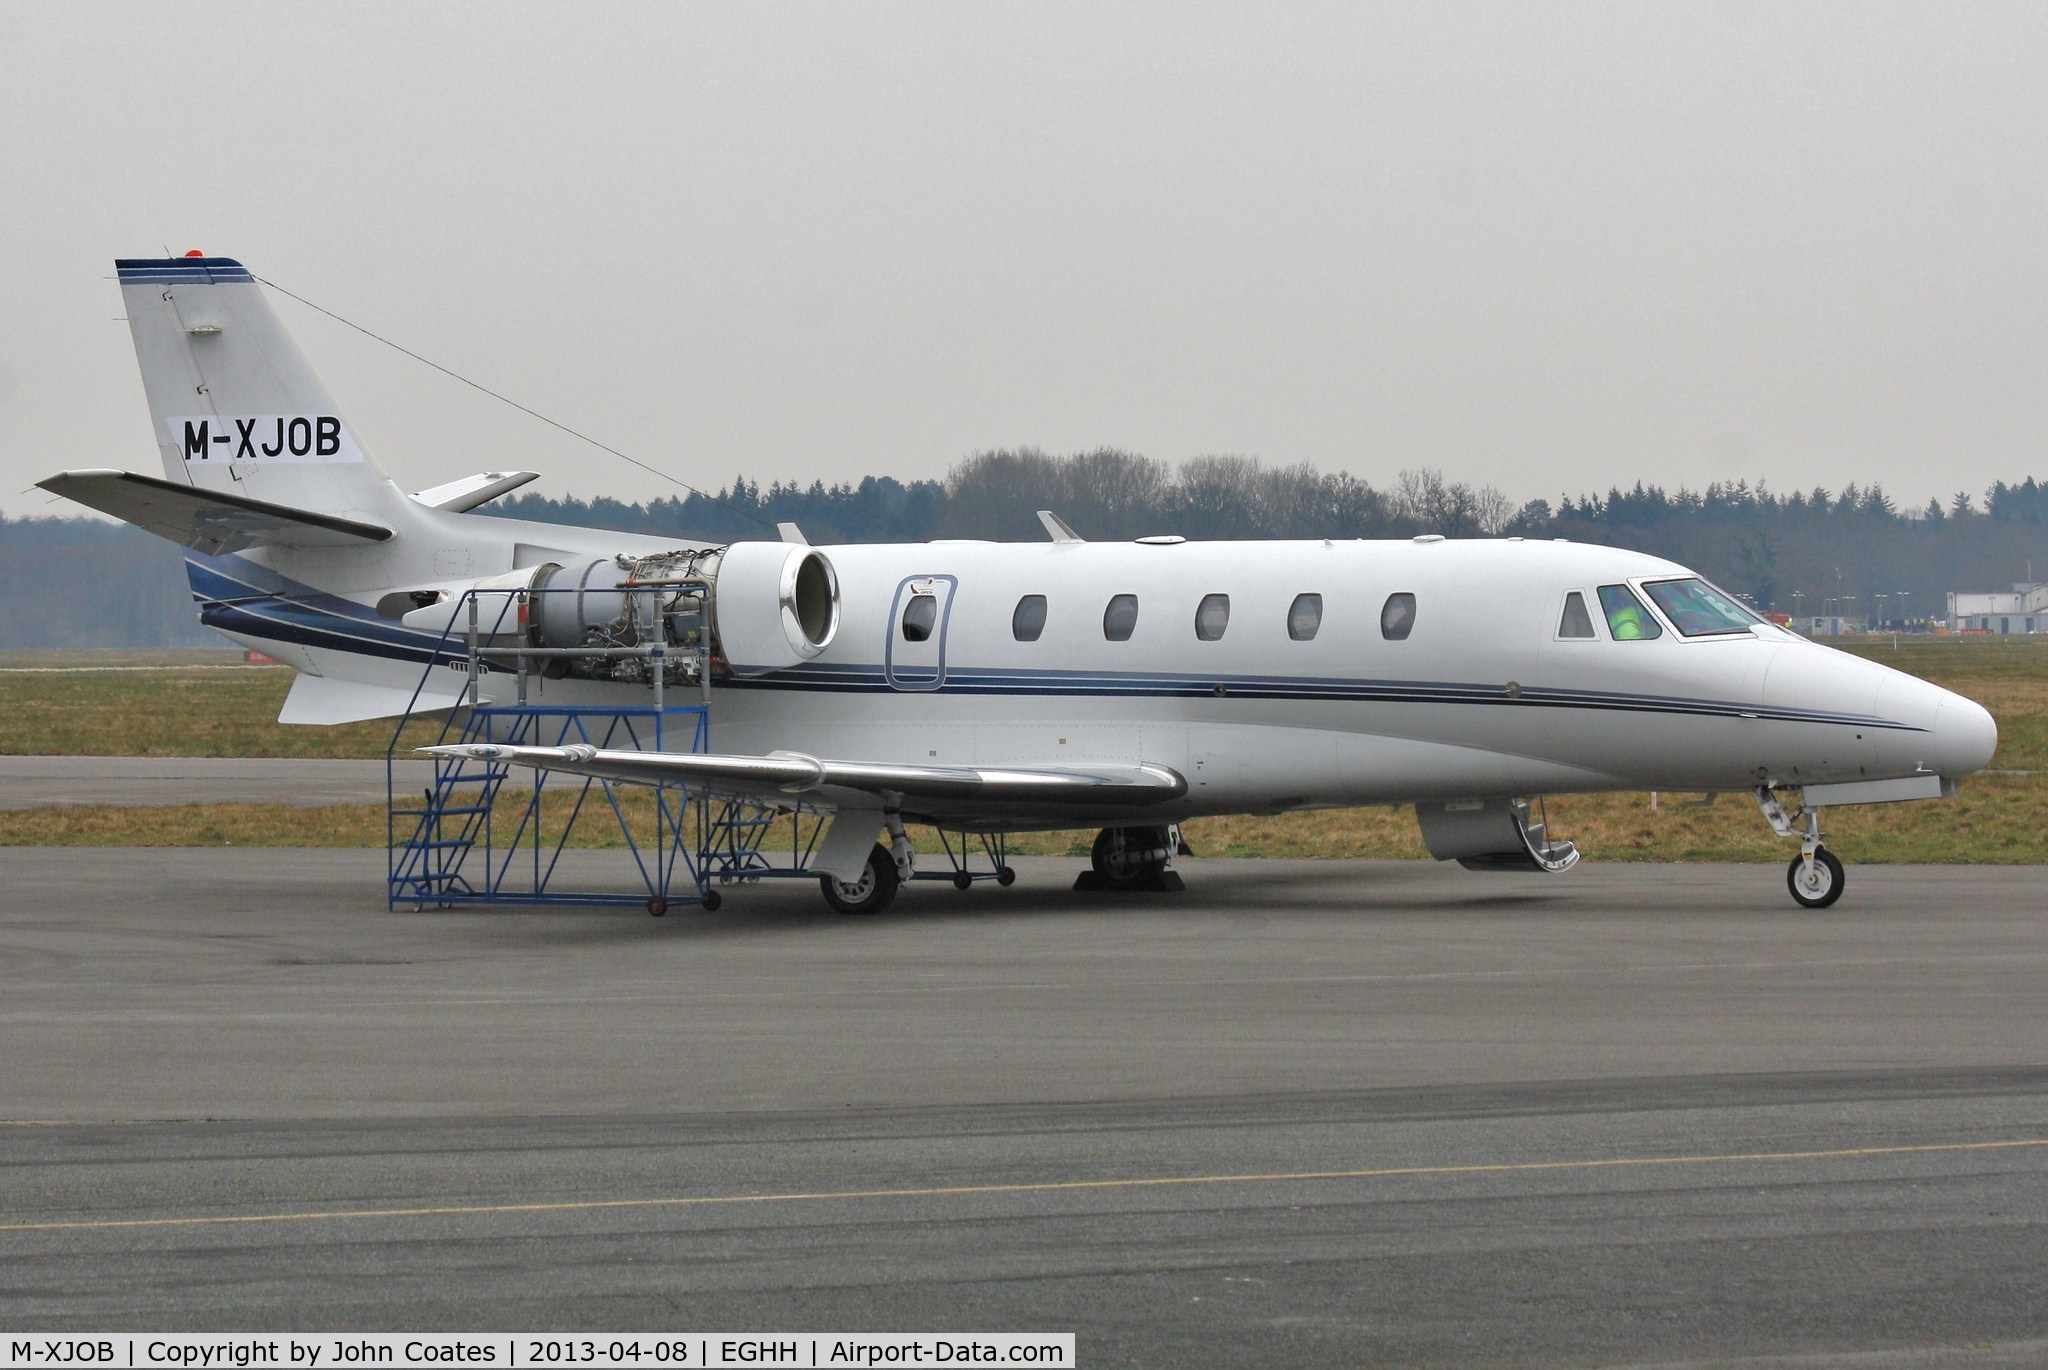 M-XJOB, 2008 Cessna 560XL Citation  XLS C/N 560-5770, Swapped regs with M-SNAP some time ago.